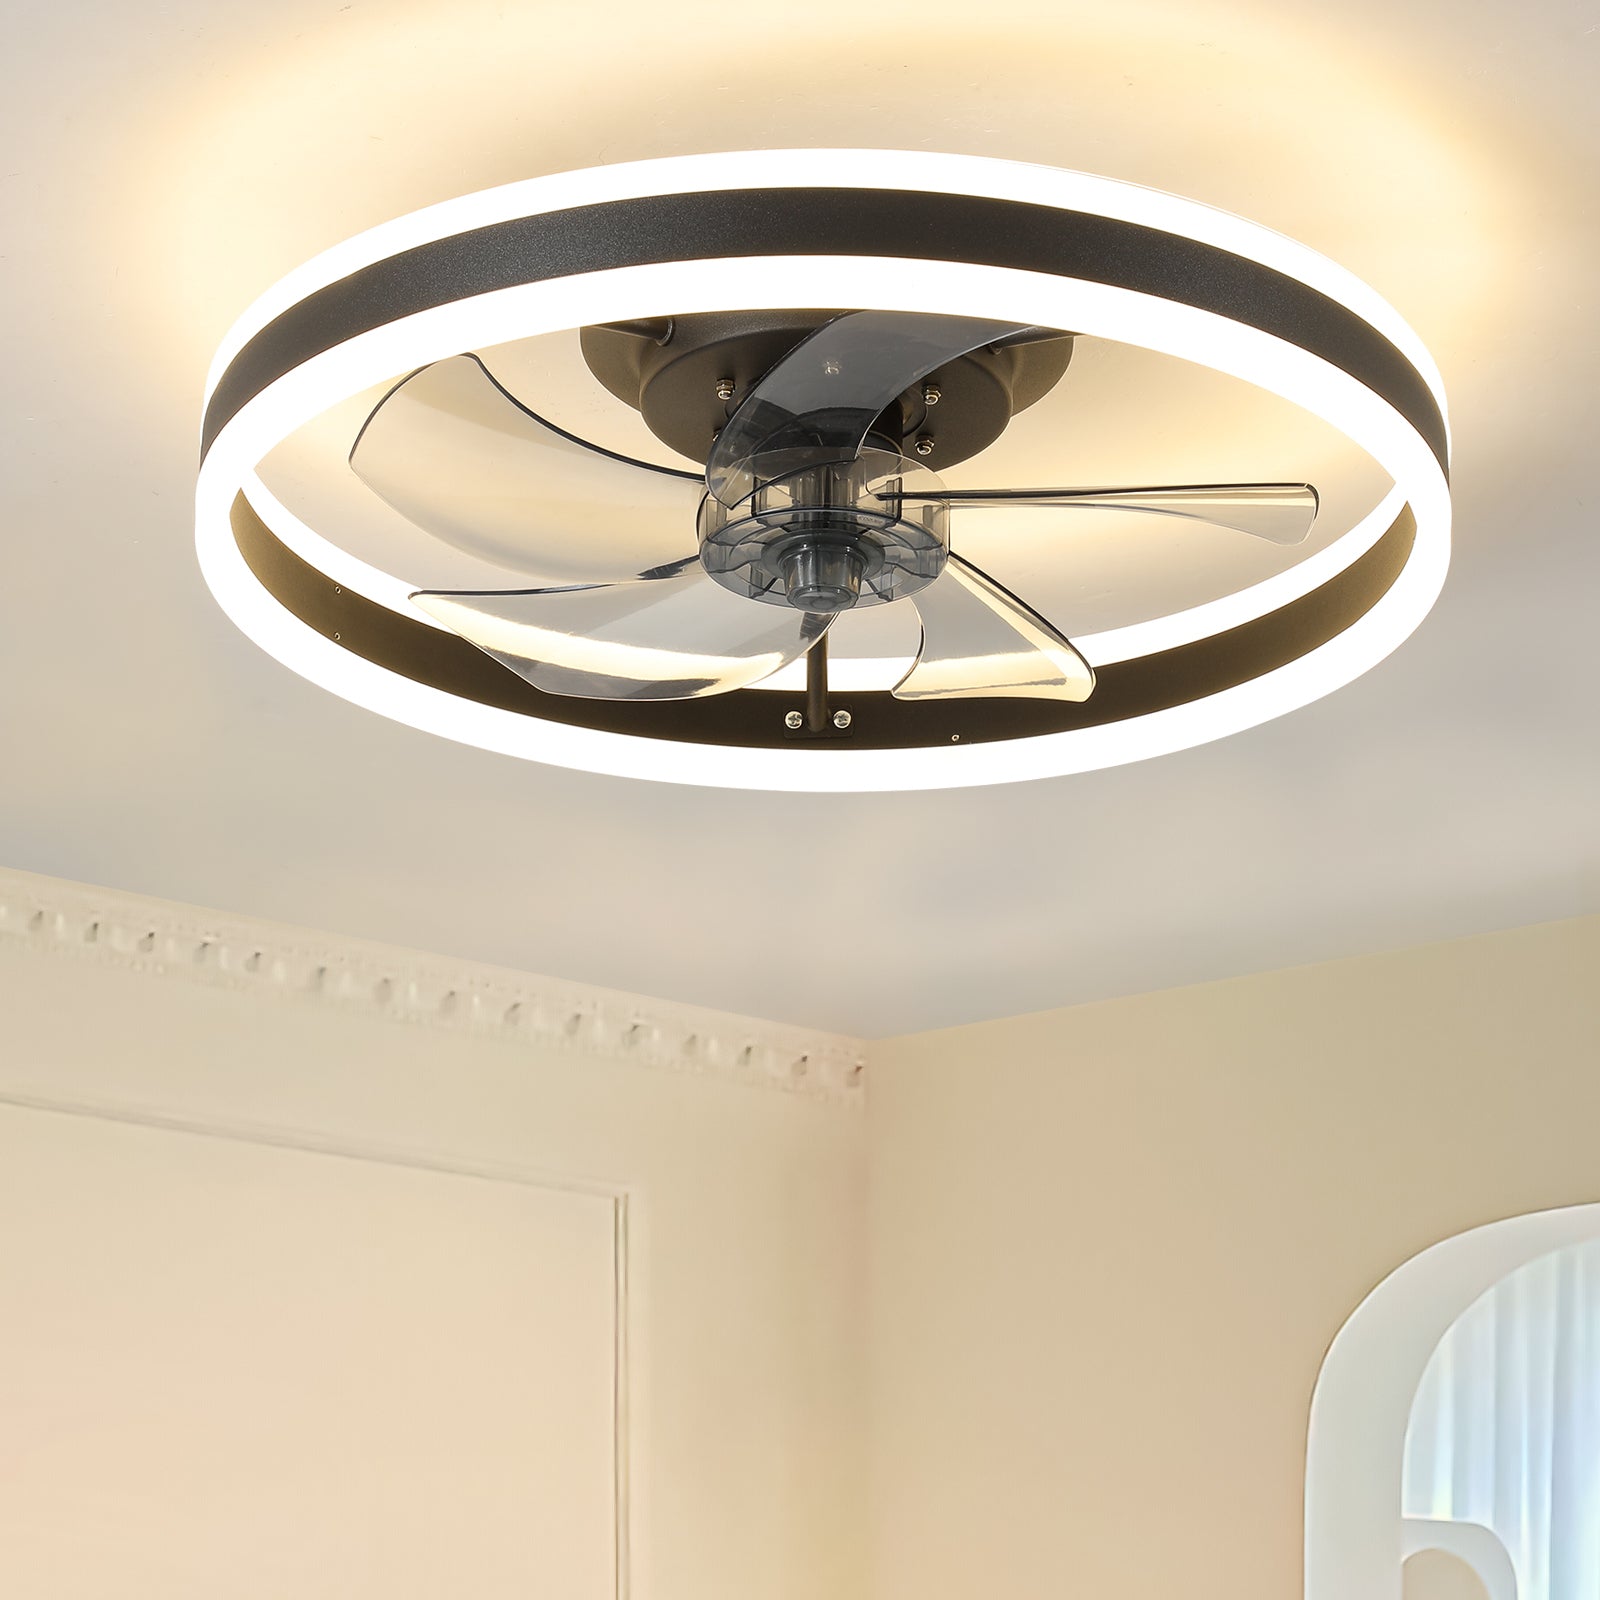 🆓🚛 6-speed Ceiling Fan, Dimmable LED Lights, Remote Control, Black